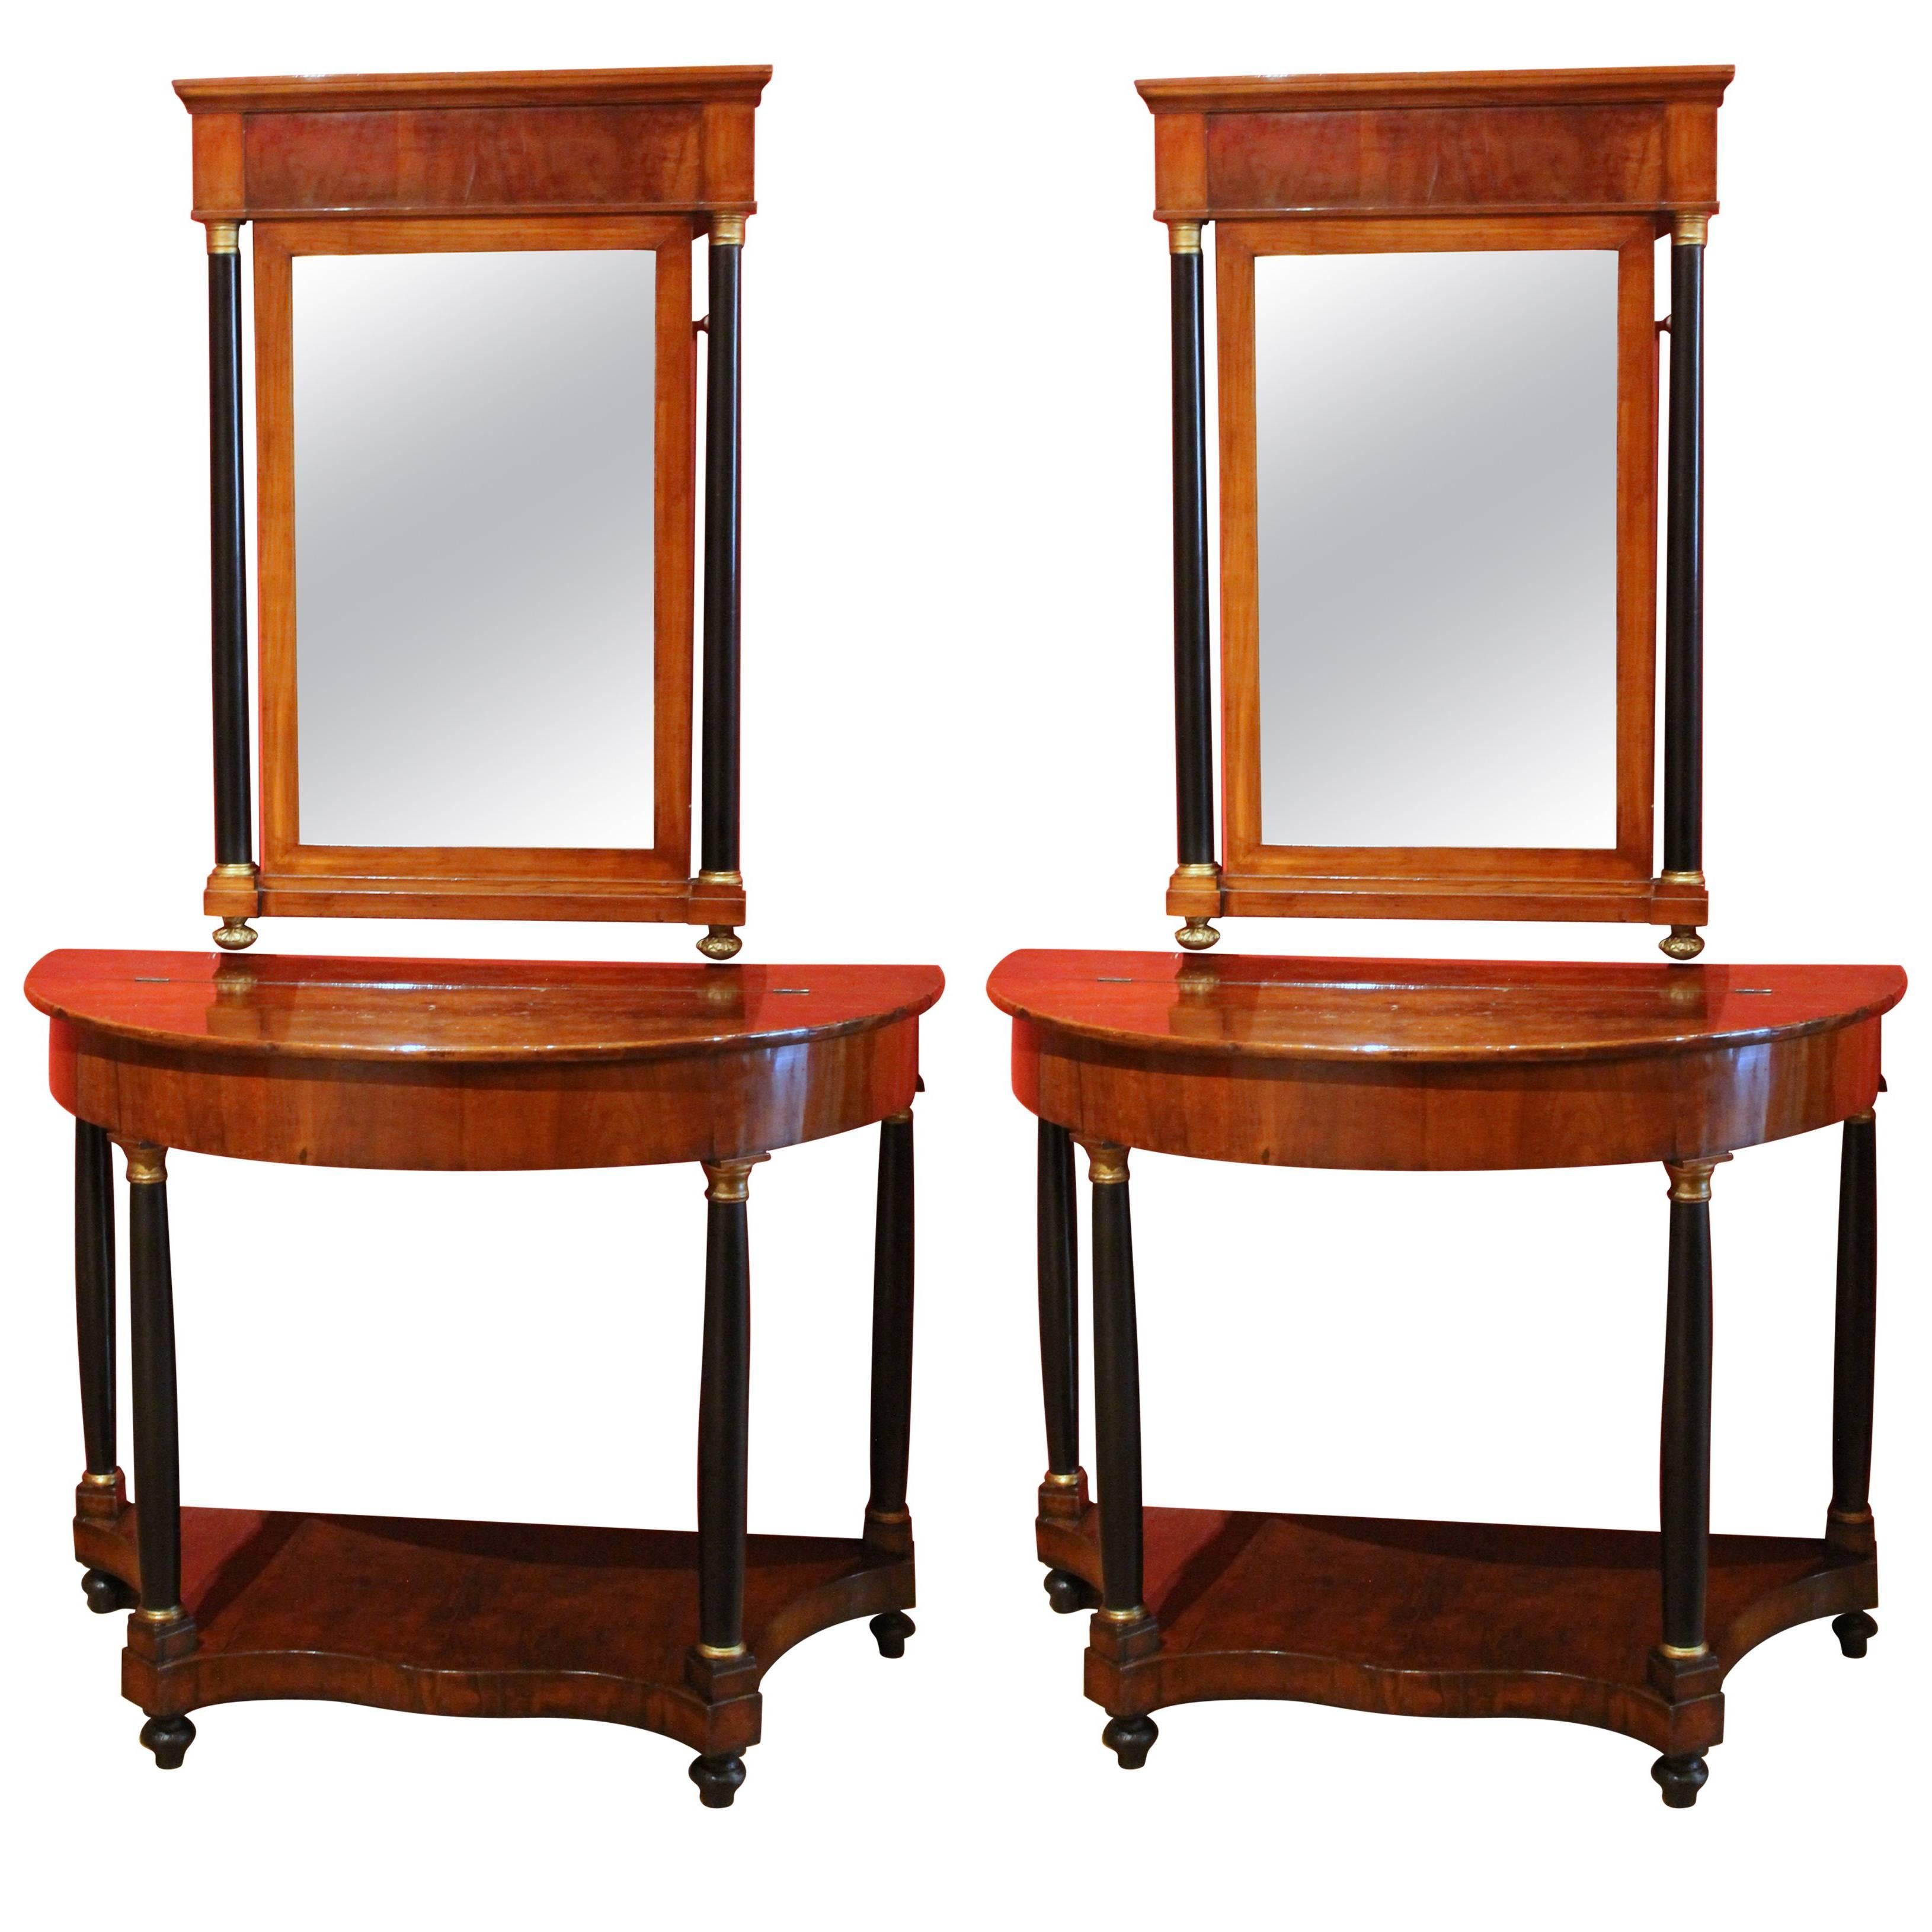 Pair of Italian Empire Period Walnut Demilune Console Table with Mirror